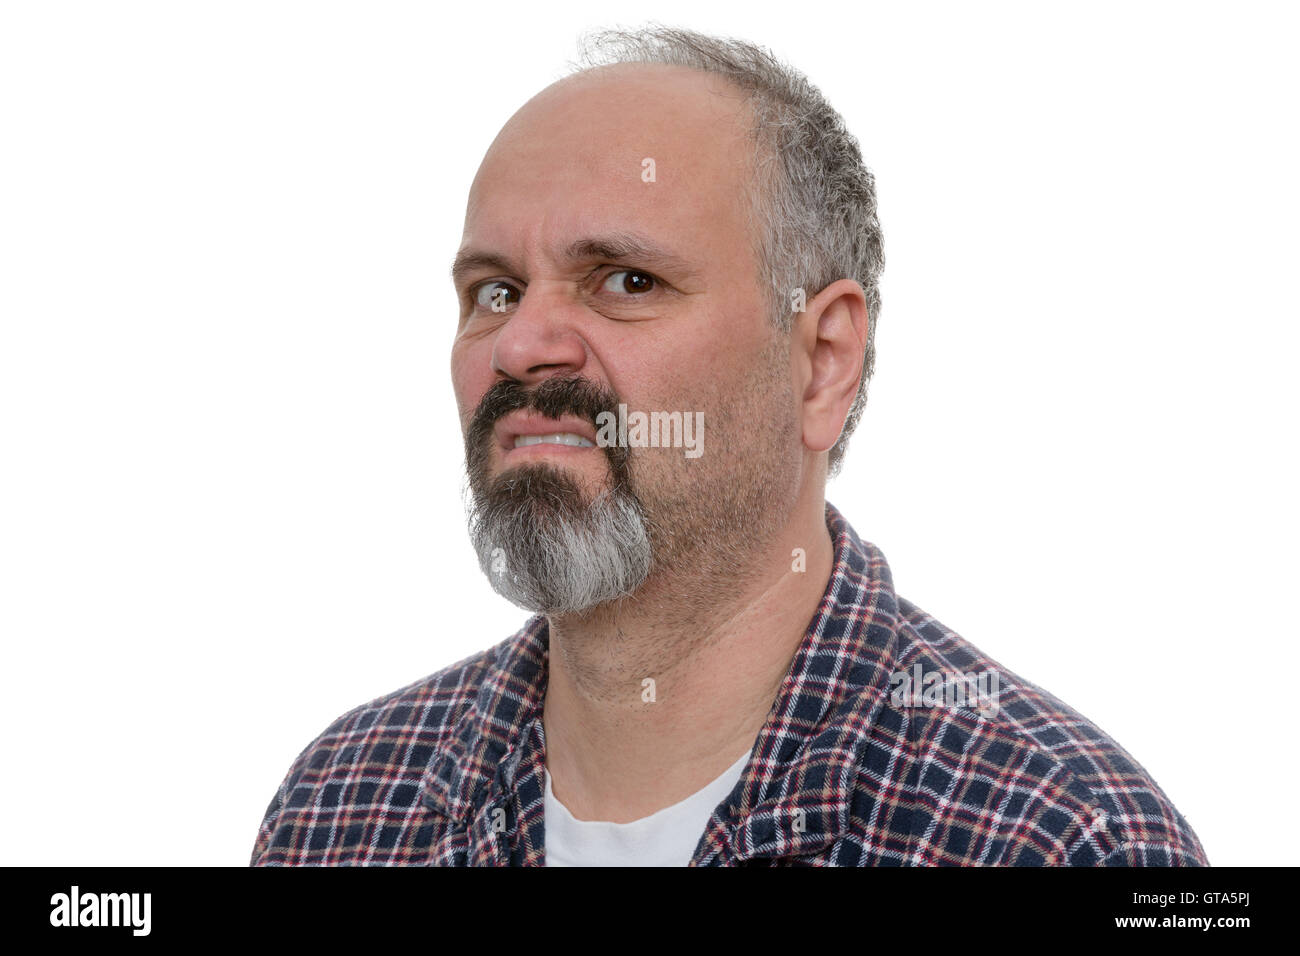 Angry balding man with beard sneers at the camera while wearing plaid shirt Stock Photo